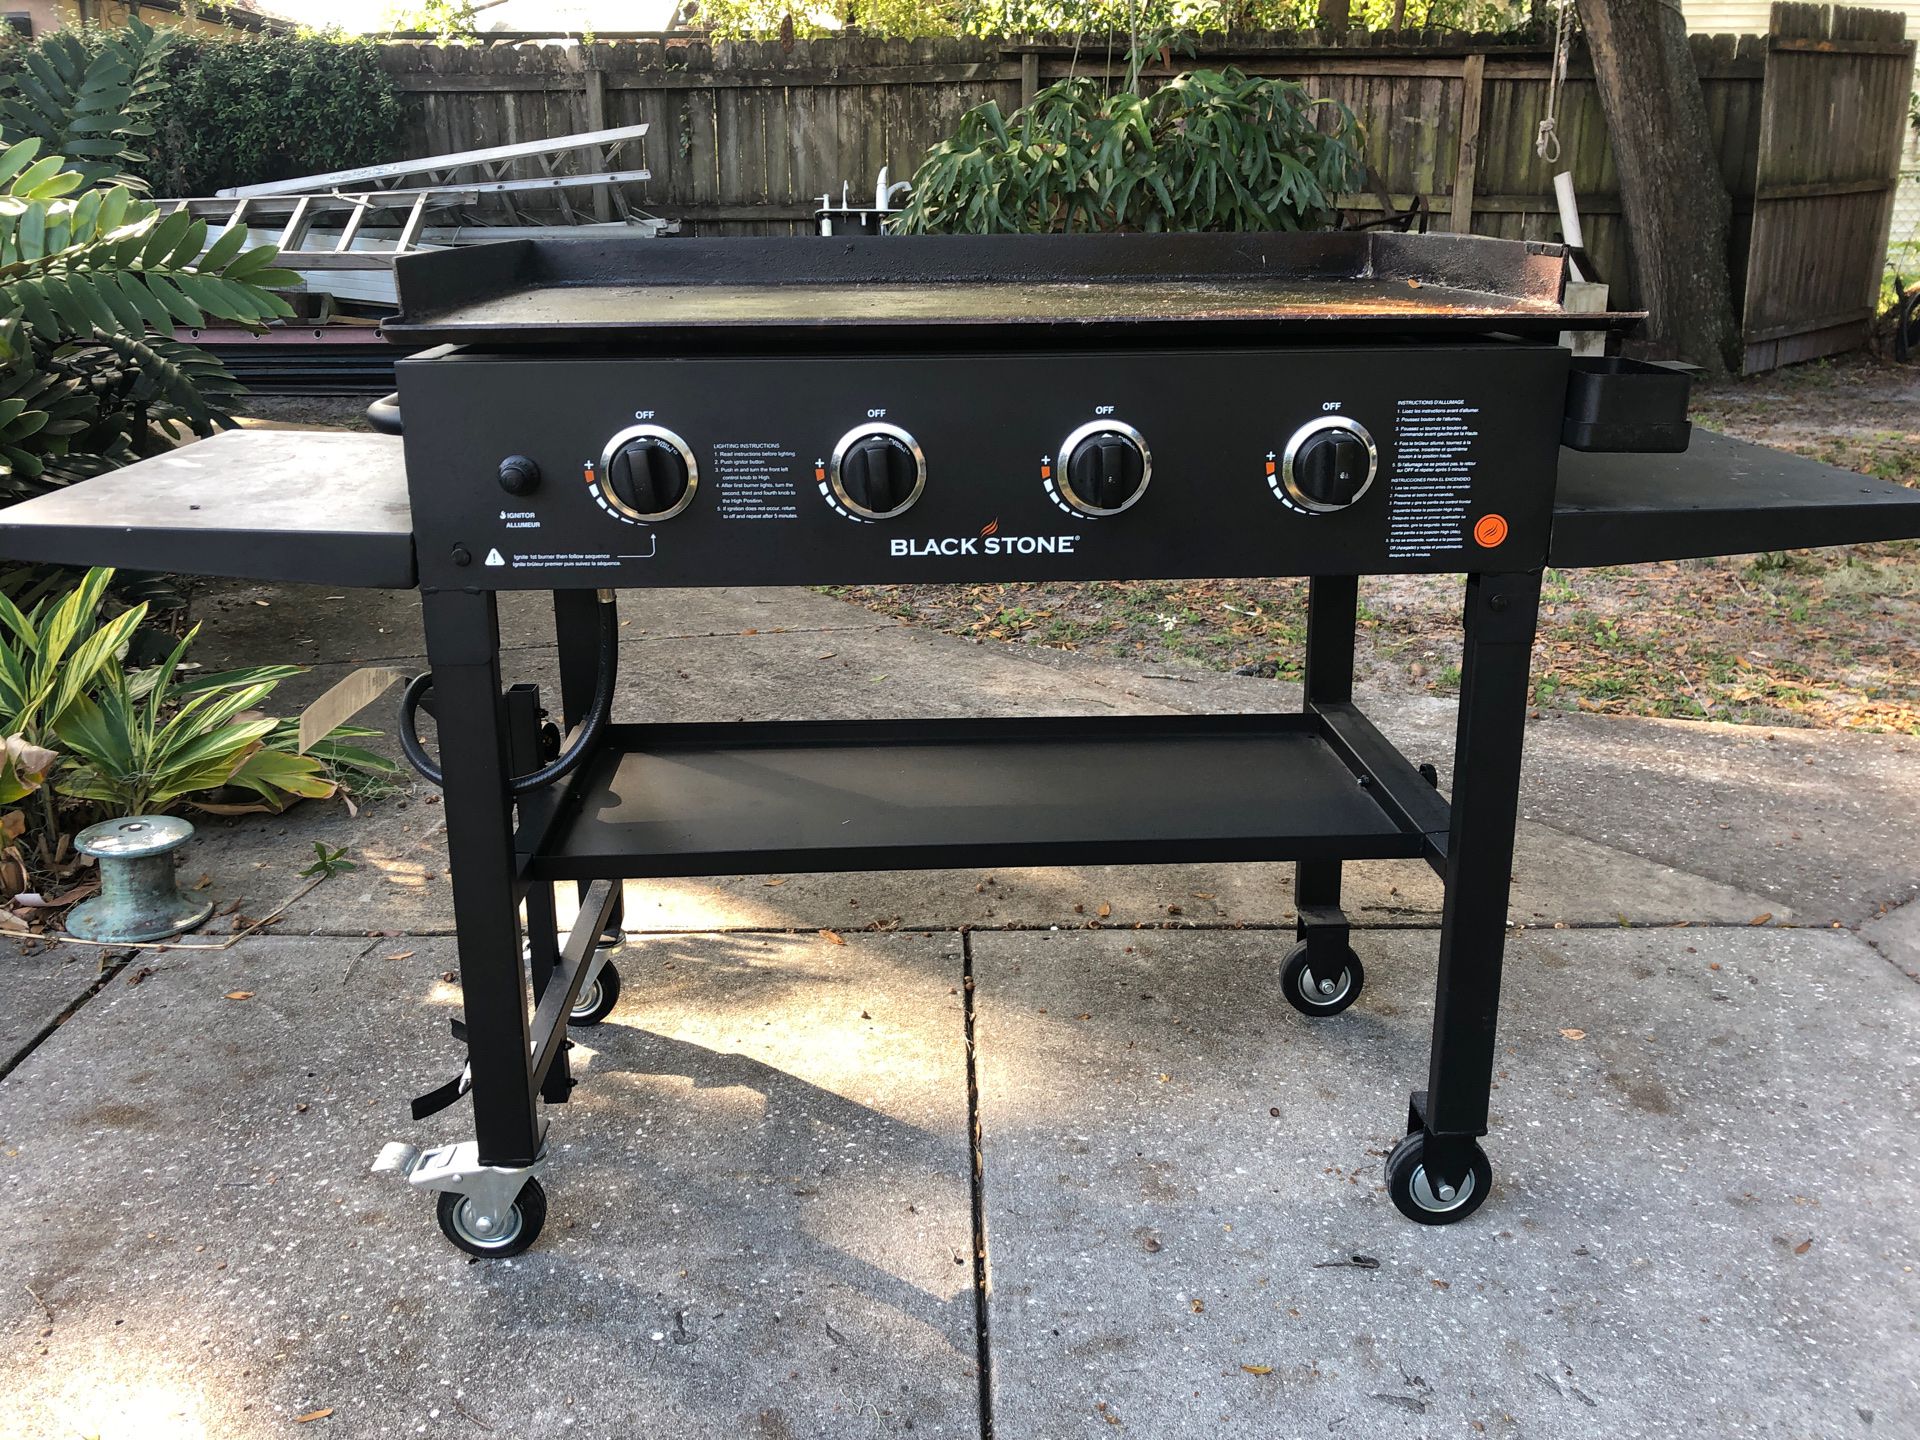 Blackstone grill 36 inch very good condition with cover Cost new $225